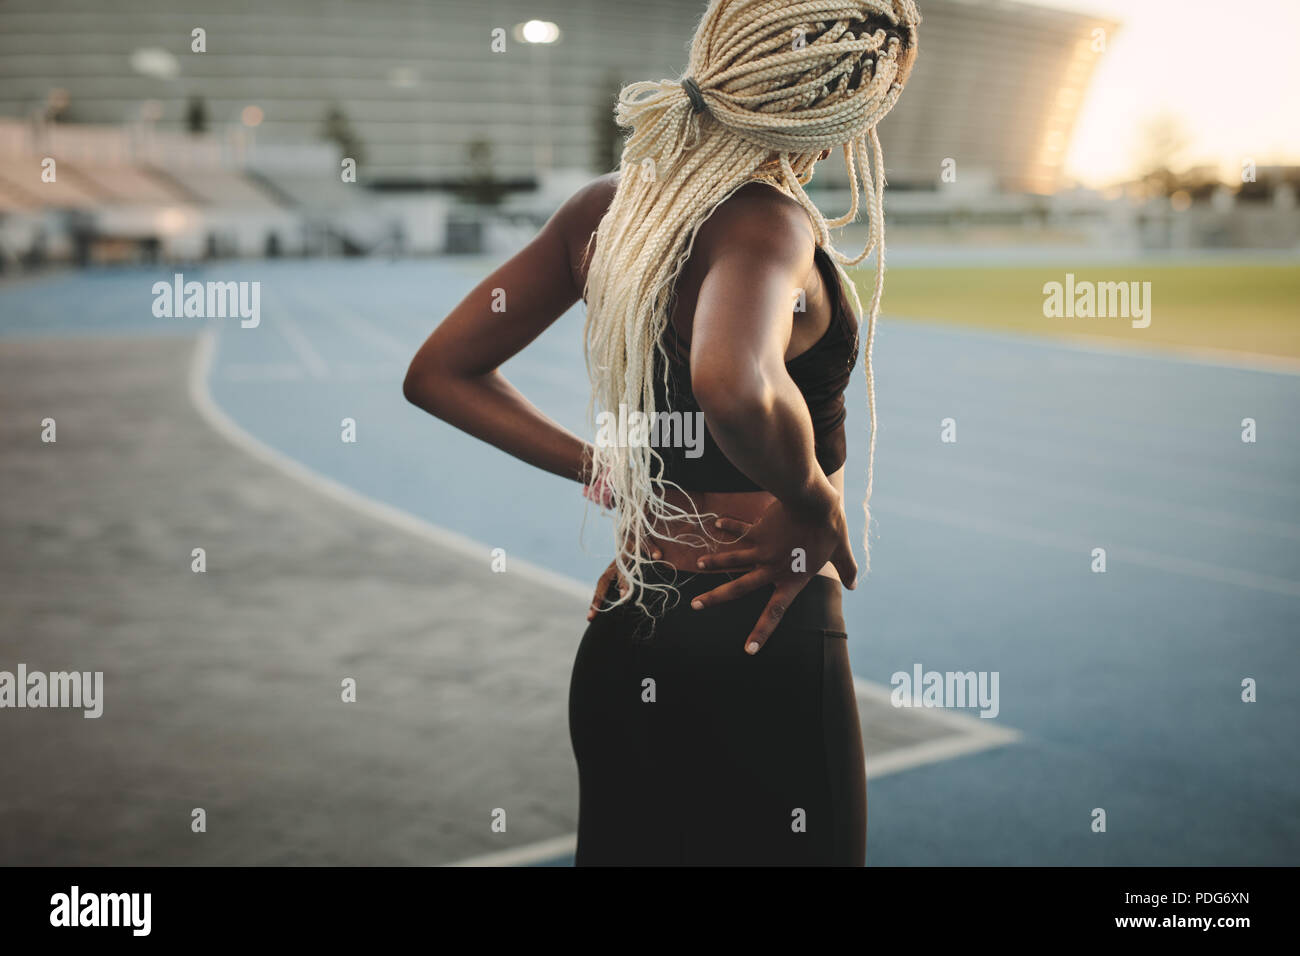 Rear view of a female runner warming up before a run with hands on hips. Woman athlete doing exercises in a track and field stadium. Stock Photo